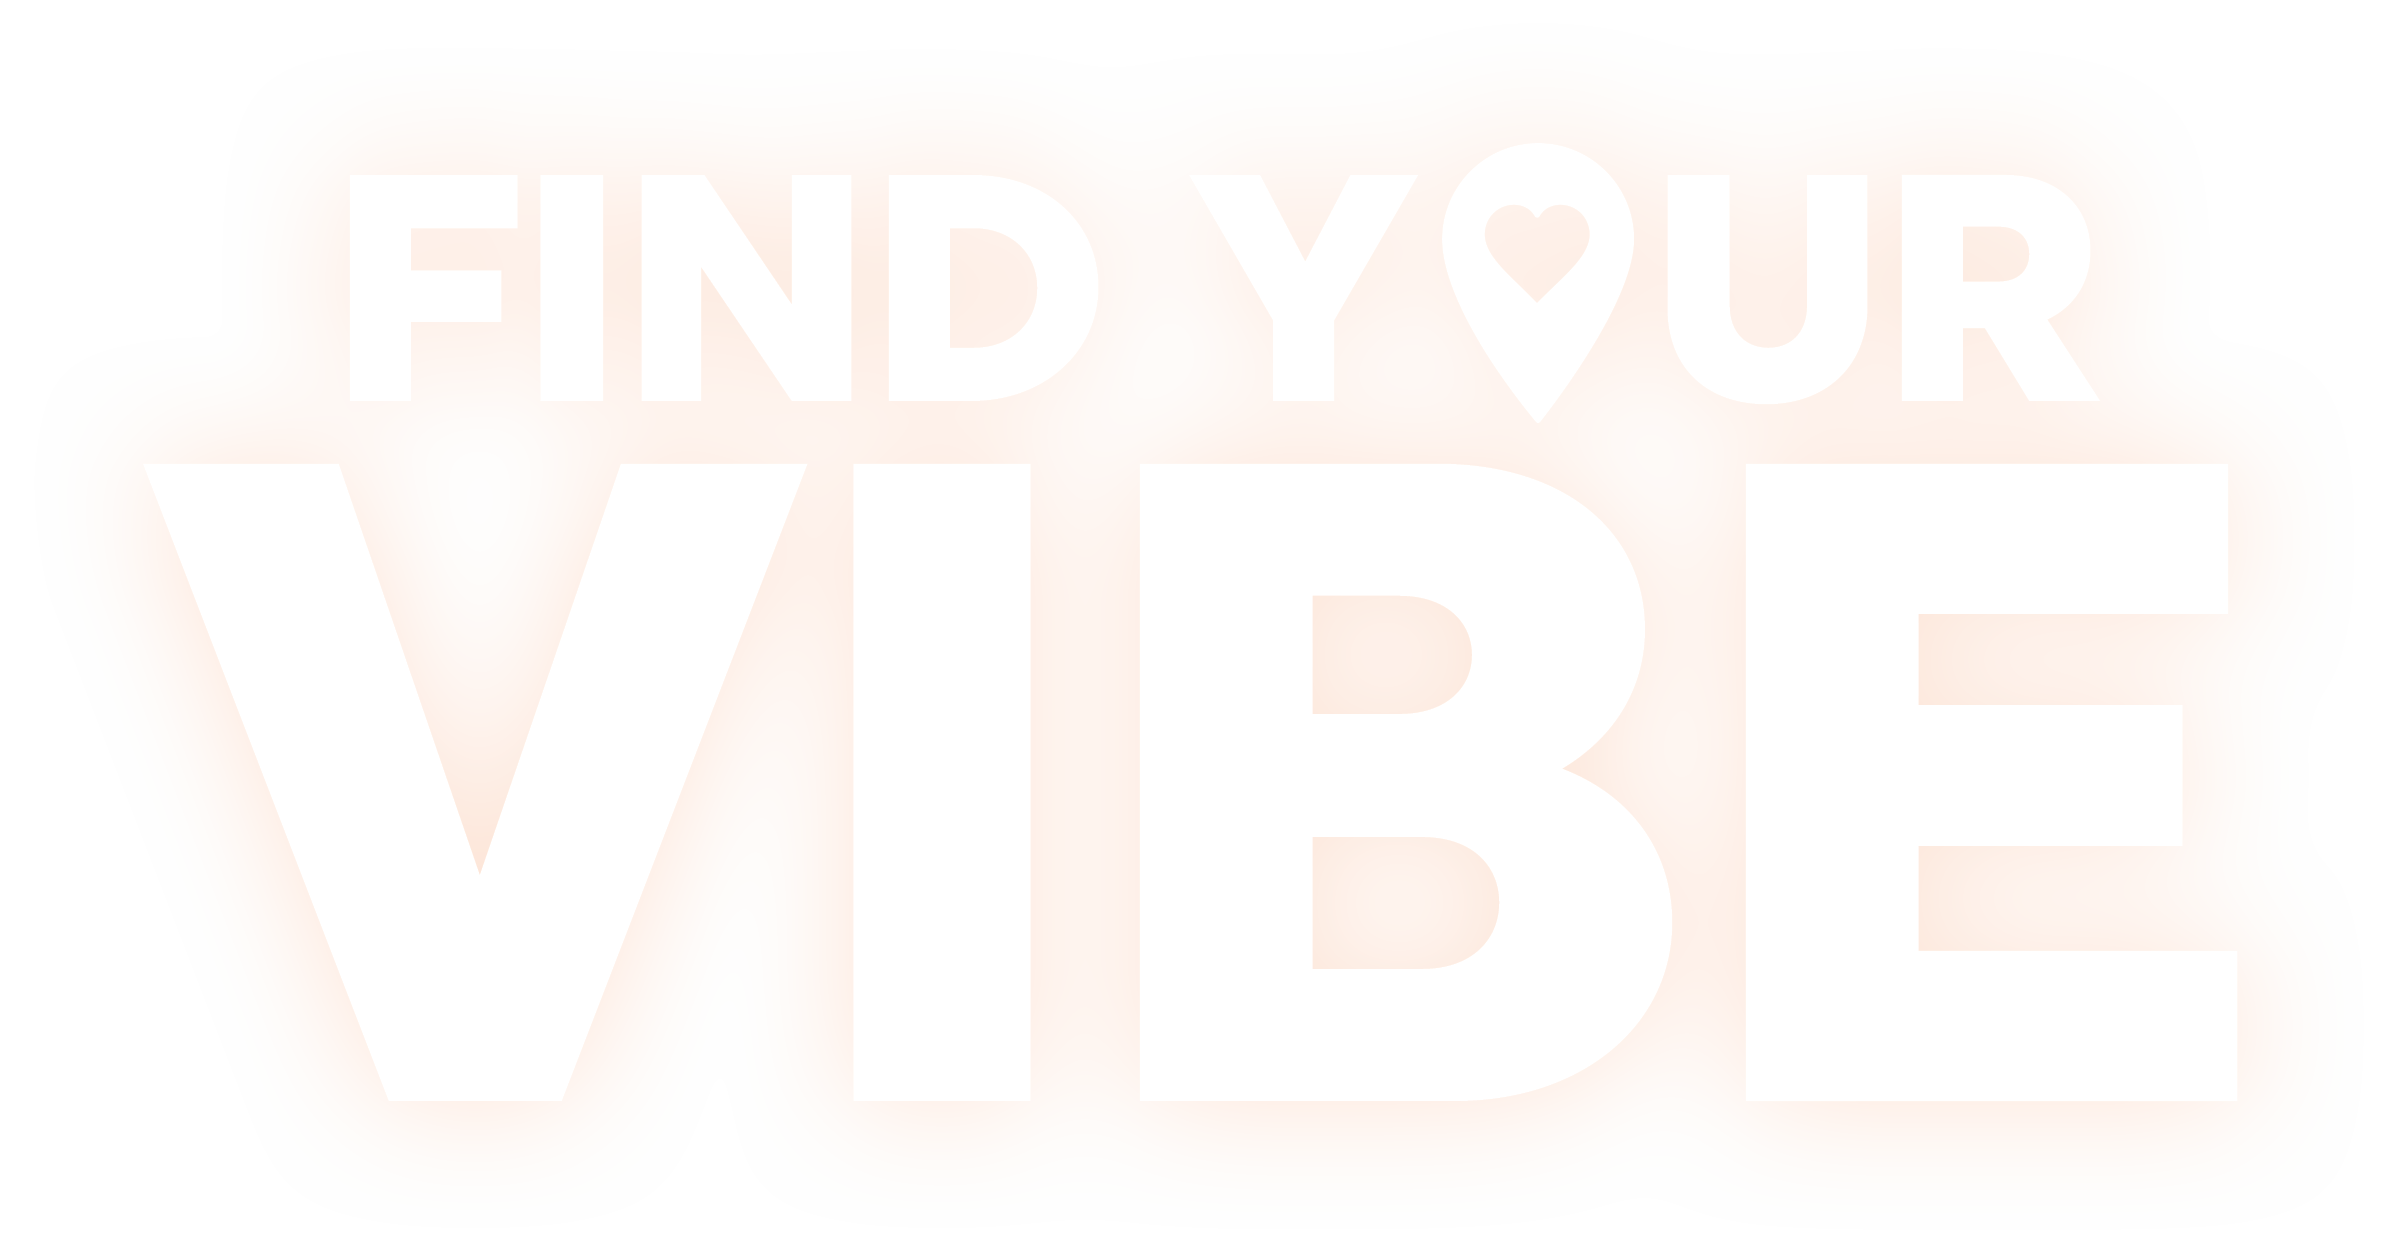 Find your vibe